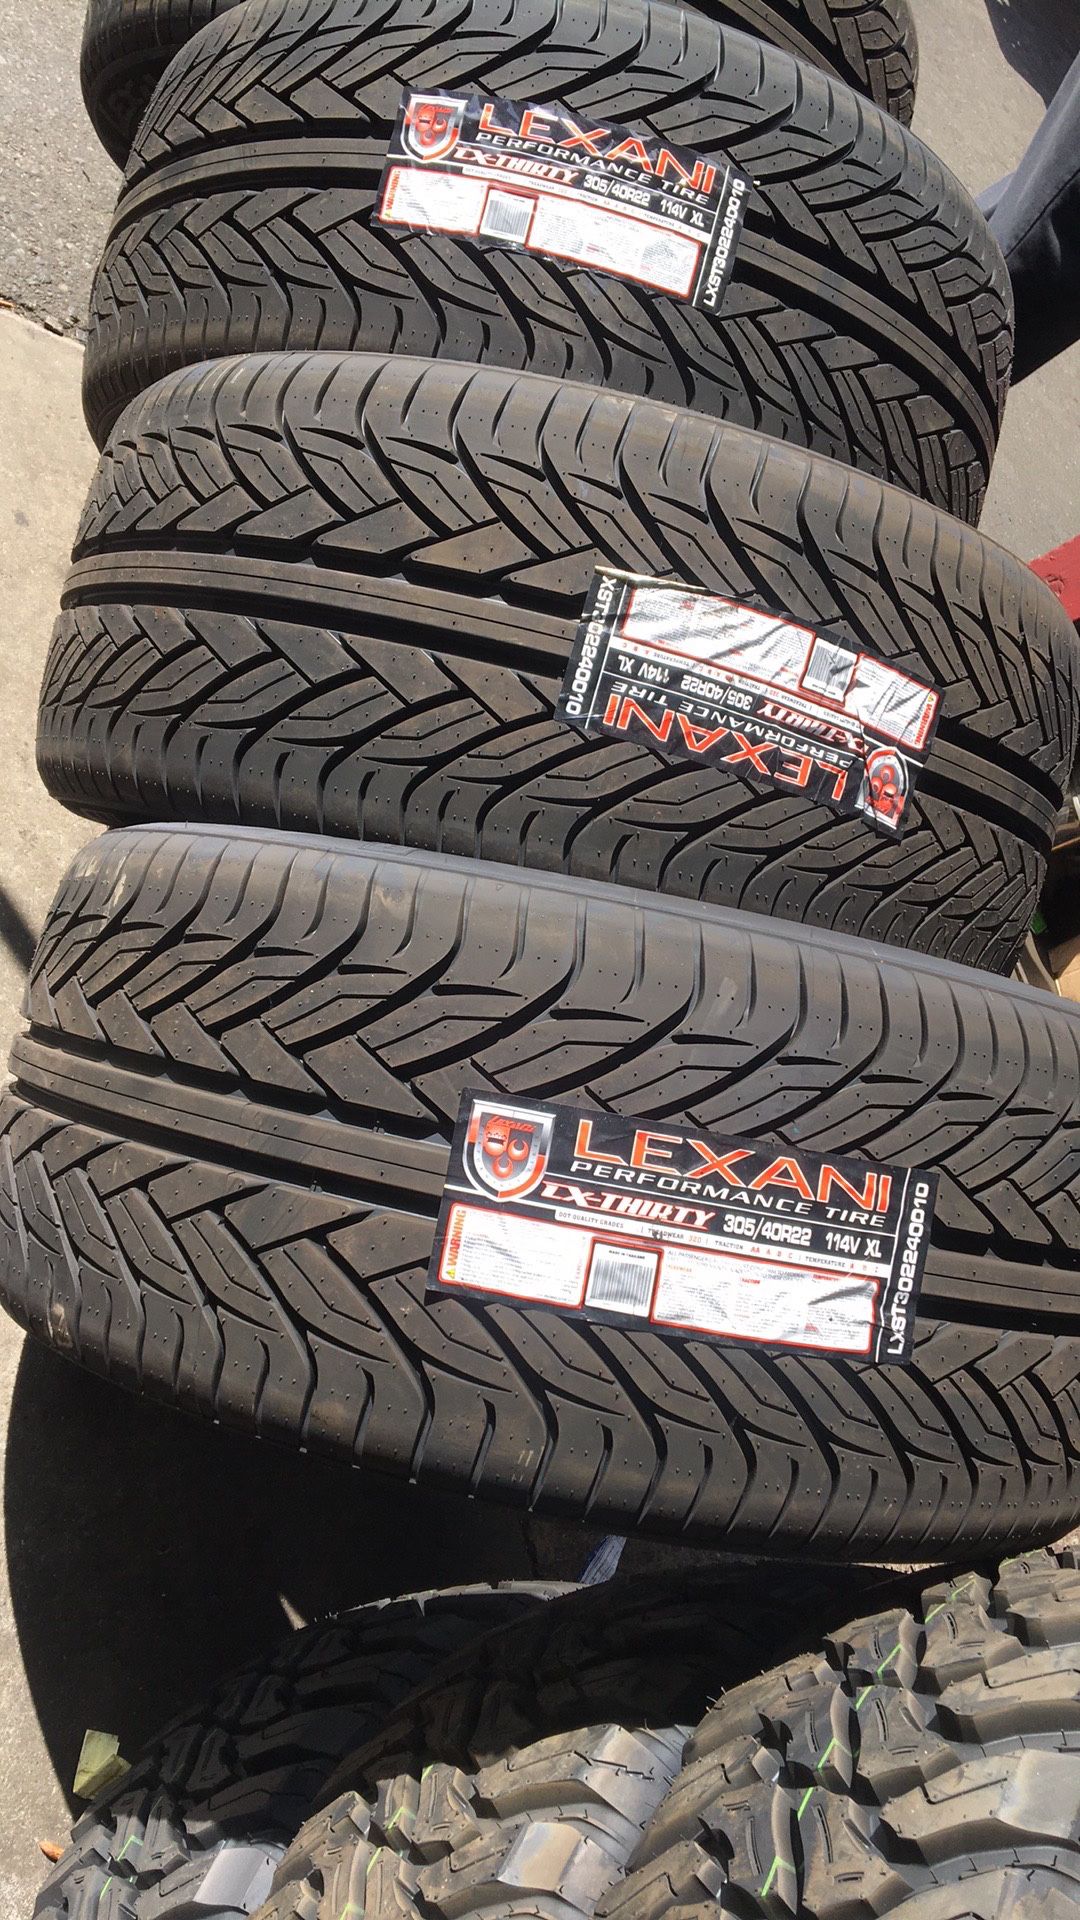 305/40R22 LEXANI TIRES $724 ALL 4 INSTALLED BALANCED (Great Quality For The Price)